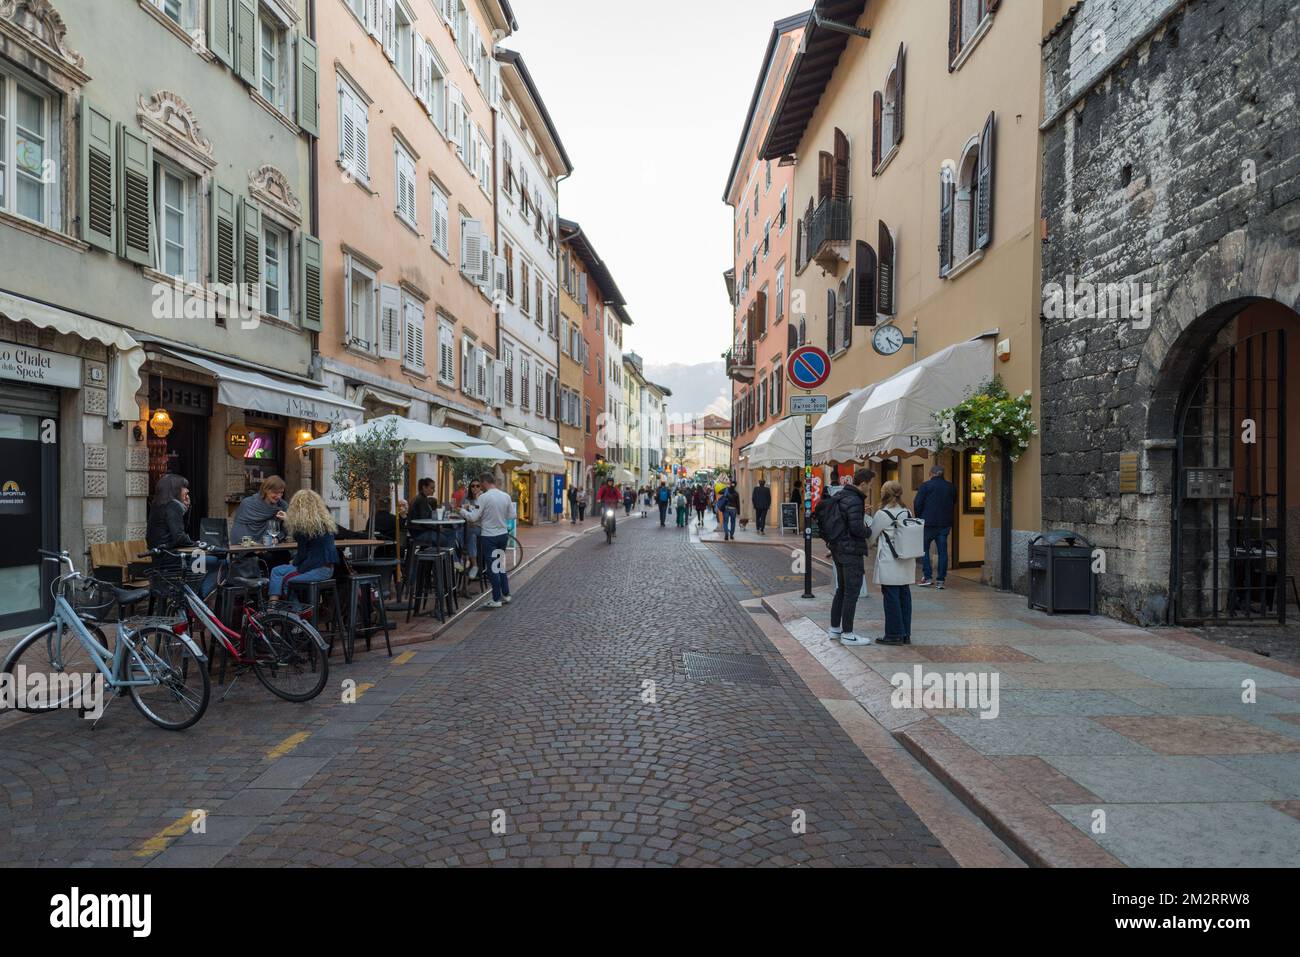 Street view in Trento old town, is the capital of the autonomous province of Trento, Northern Italy Stock Photo